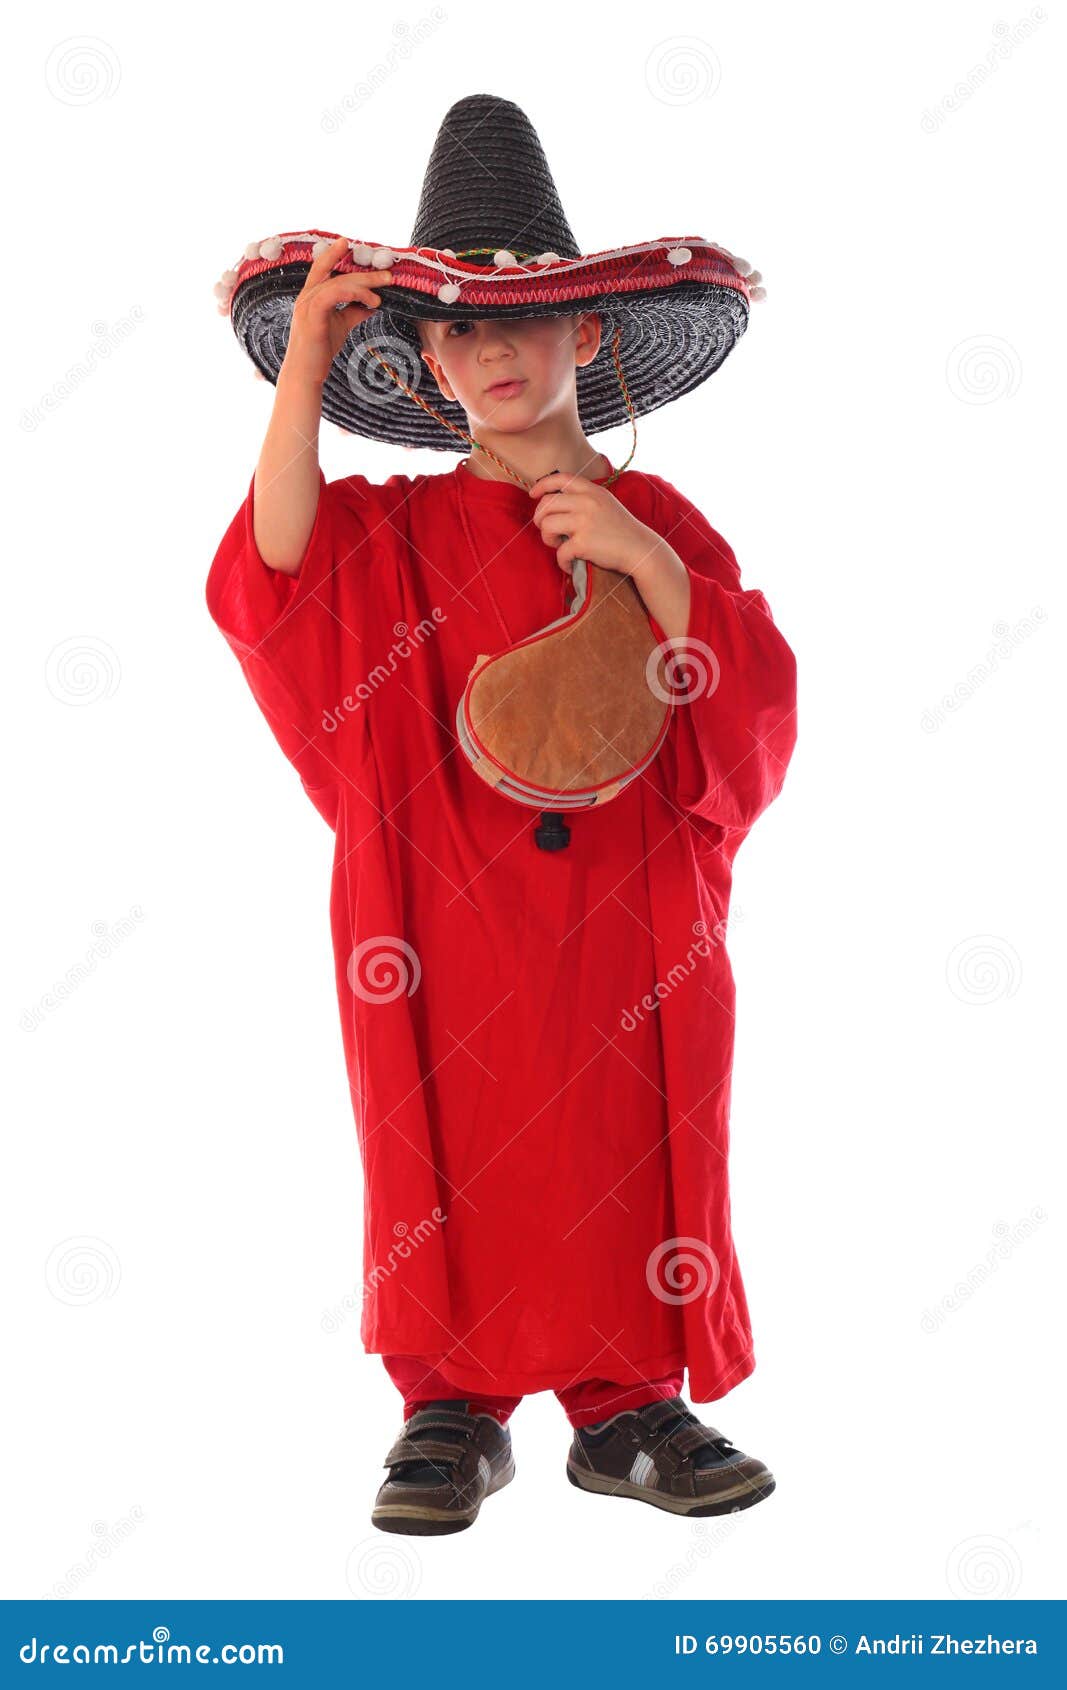 boy in spanish red shirt and sombrero holding bota bag with wine